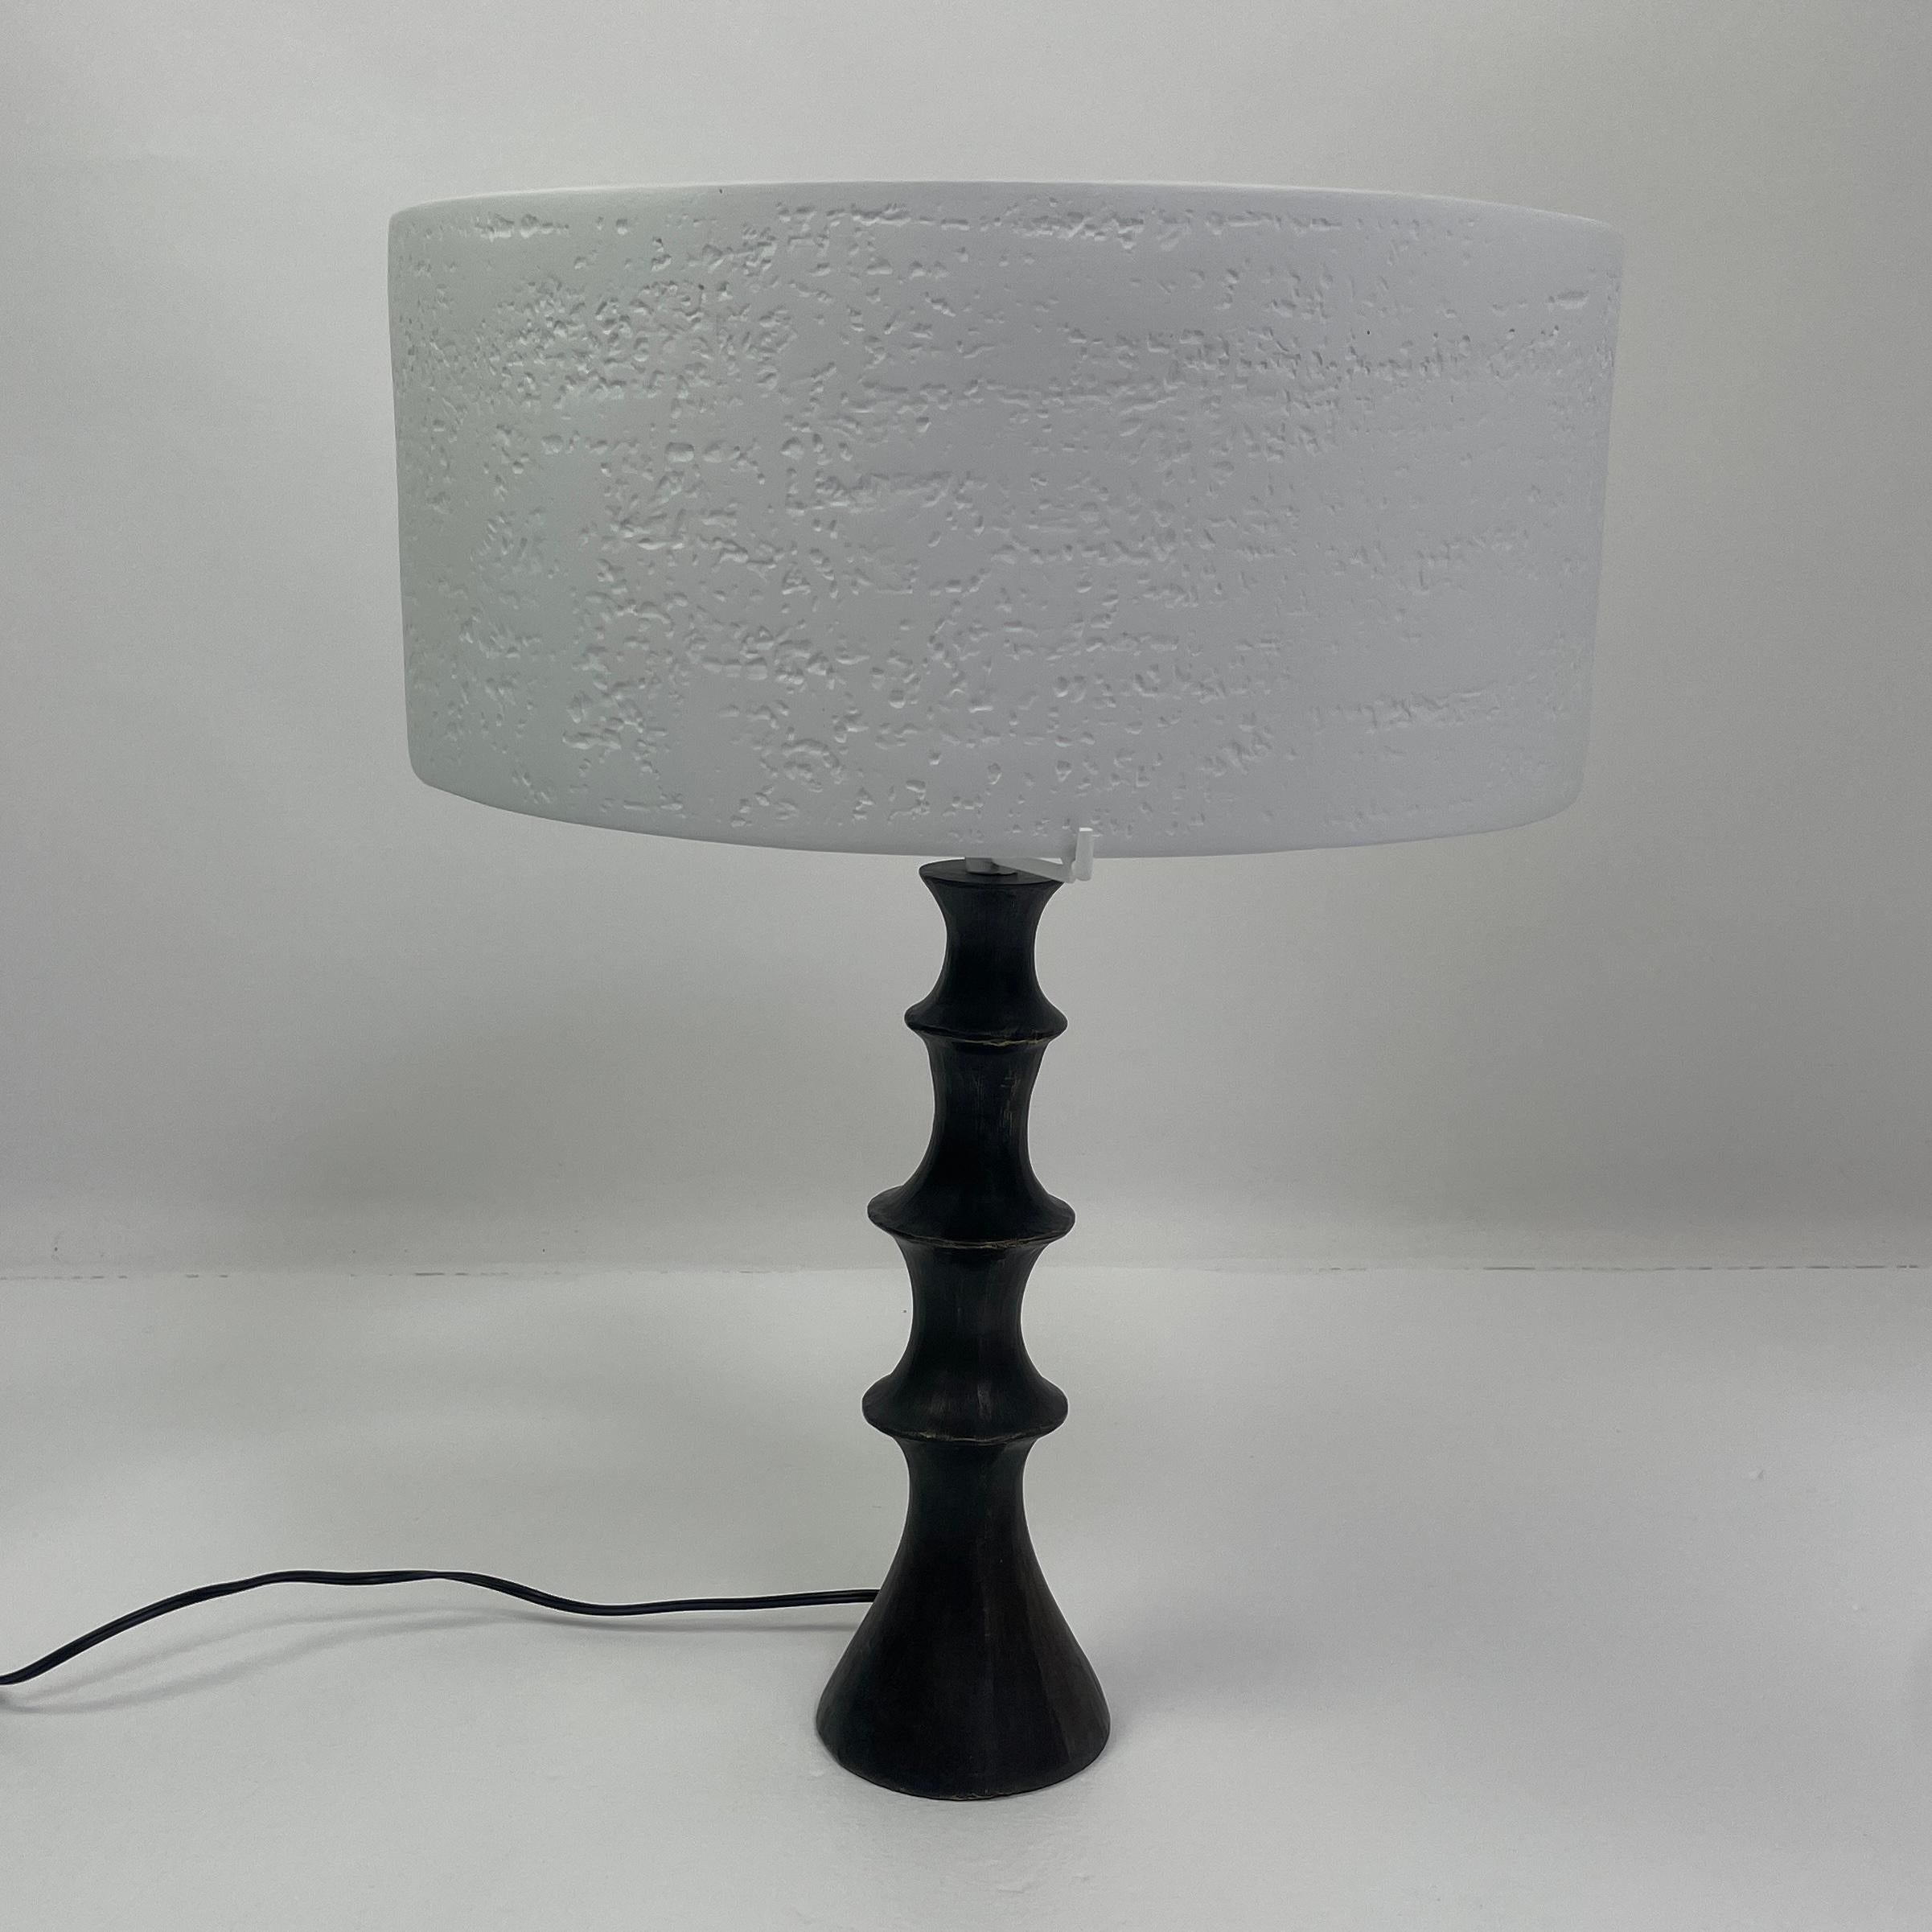 This unique lamp blends bronze and our signature plaster finish to create an elegant statement. The cast bronze base with the plaster shade create a soft diffused light. The light uses low voltage LED bulbs.
